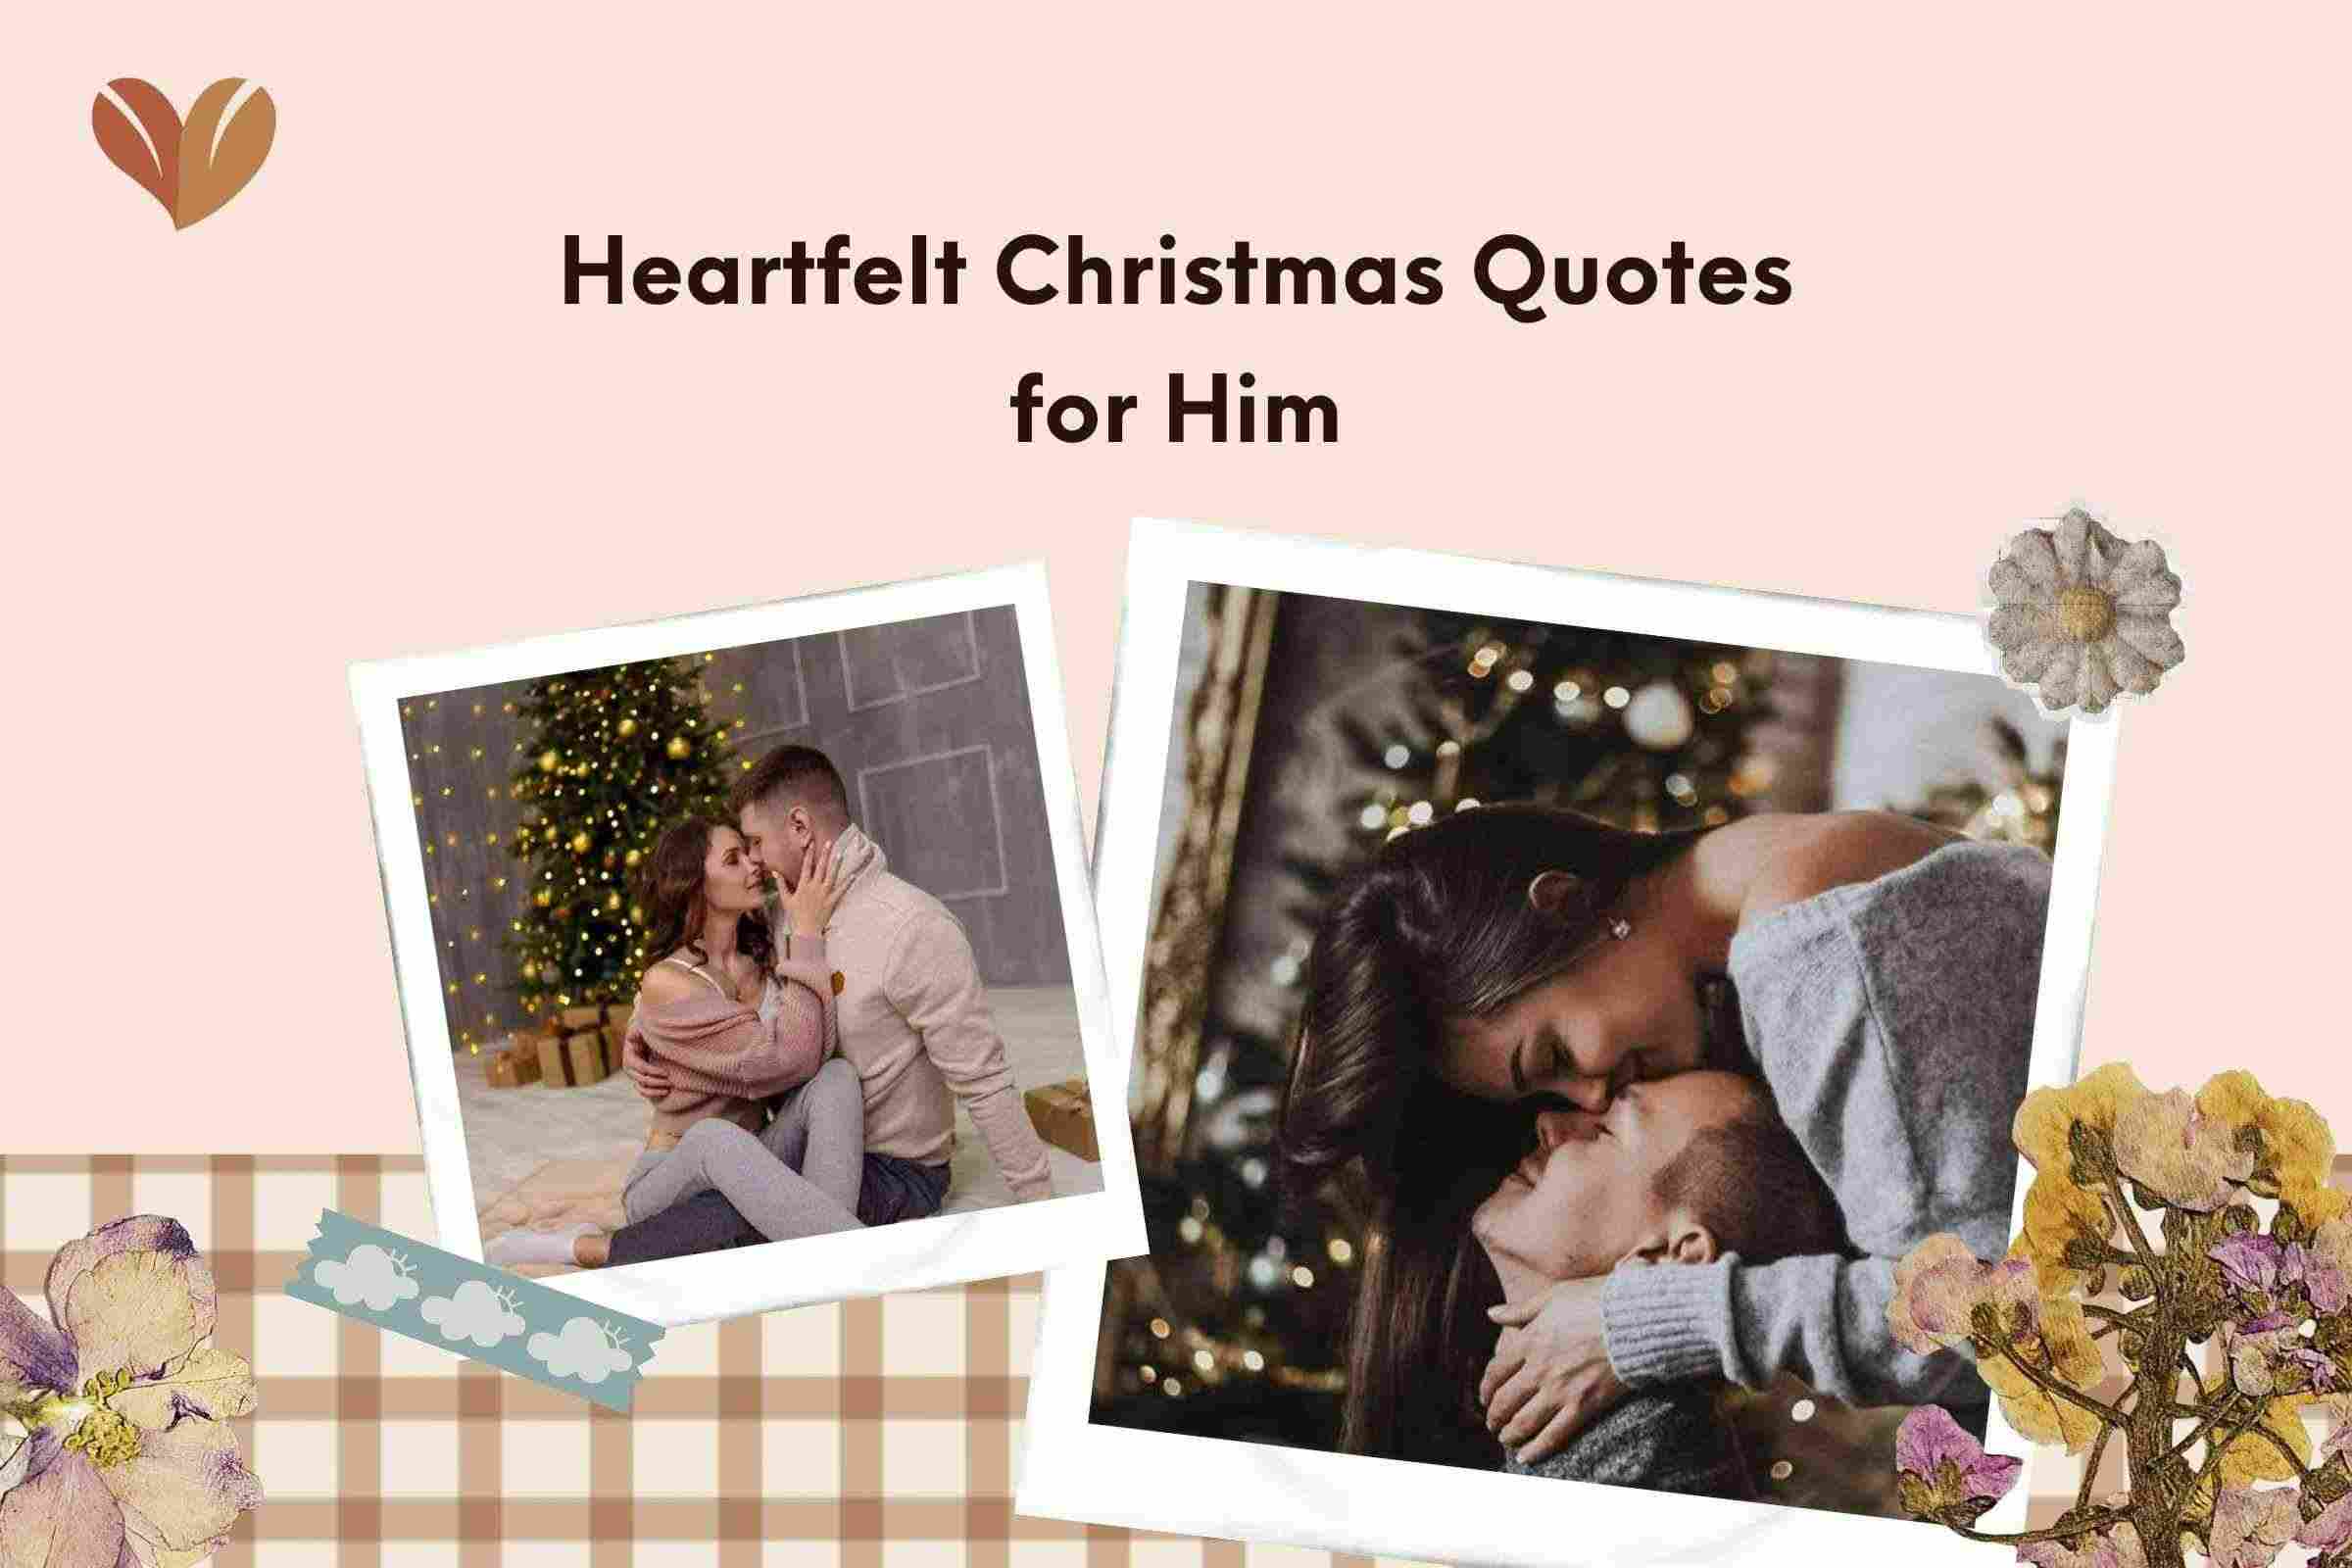 Heartfelt Christmas Quotes for Him